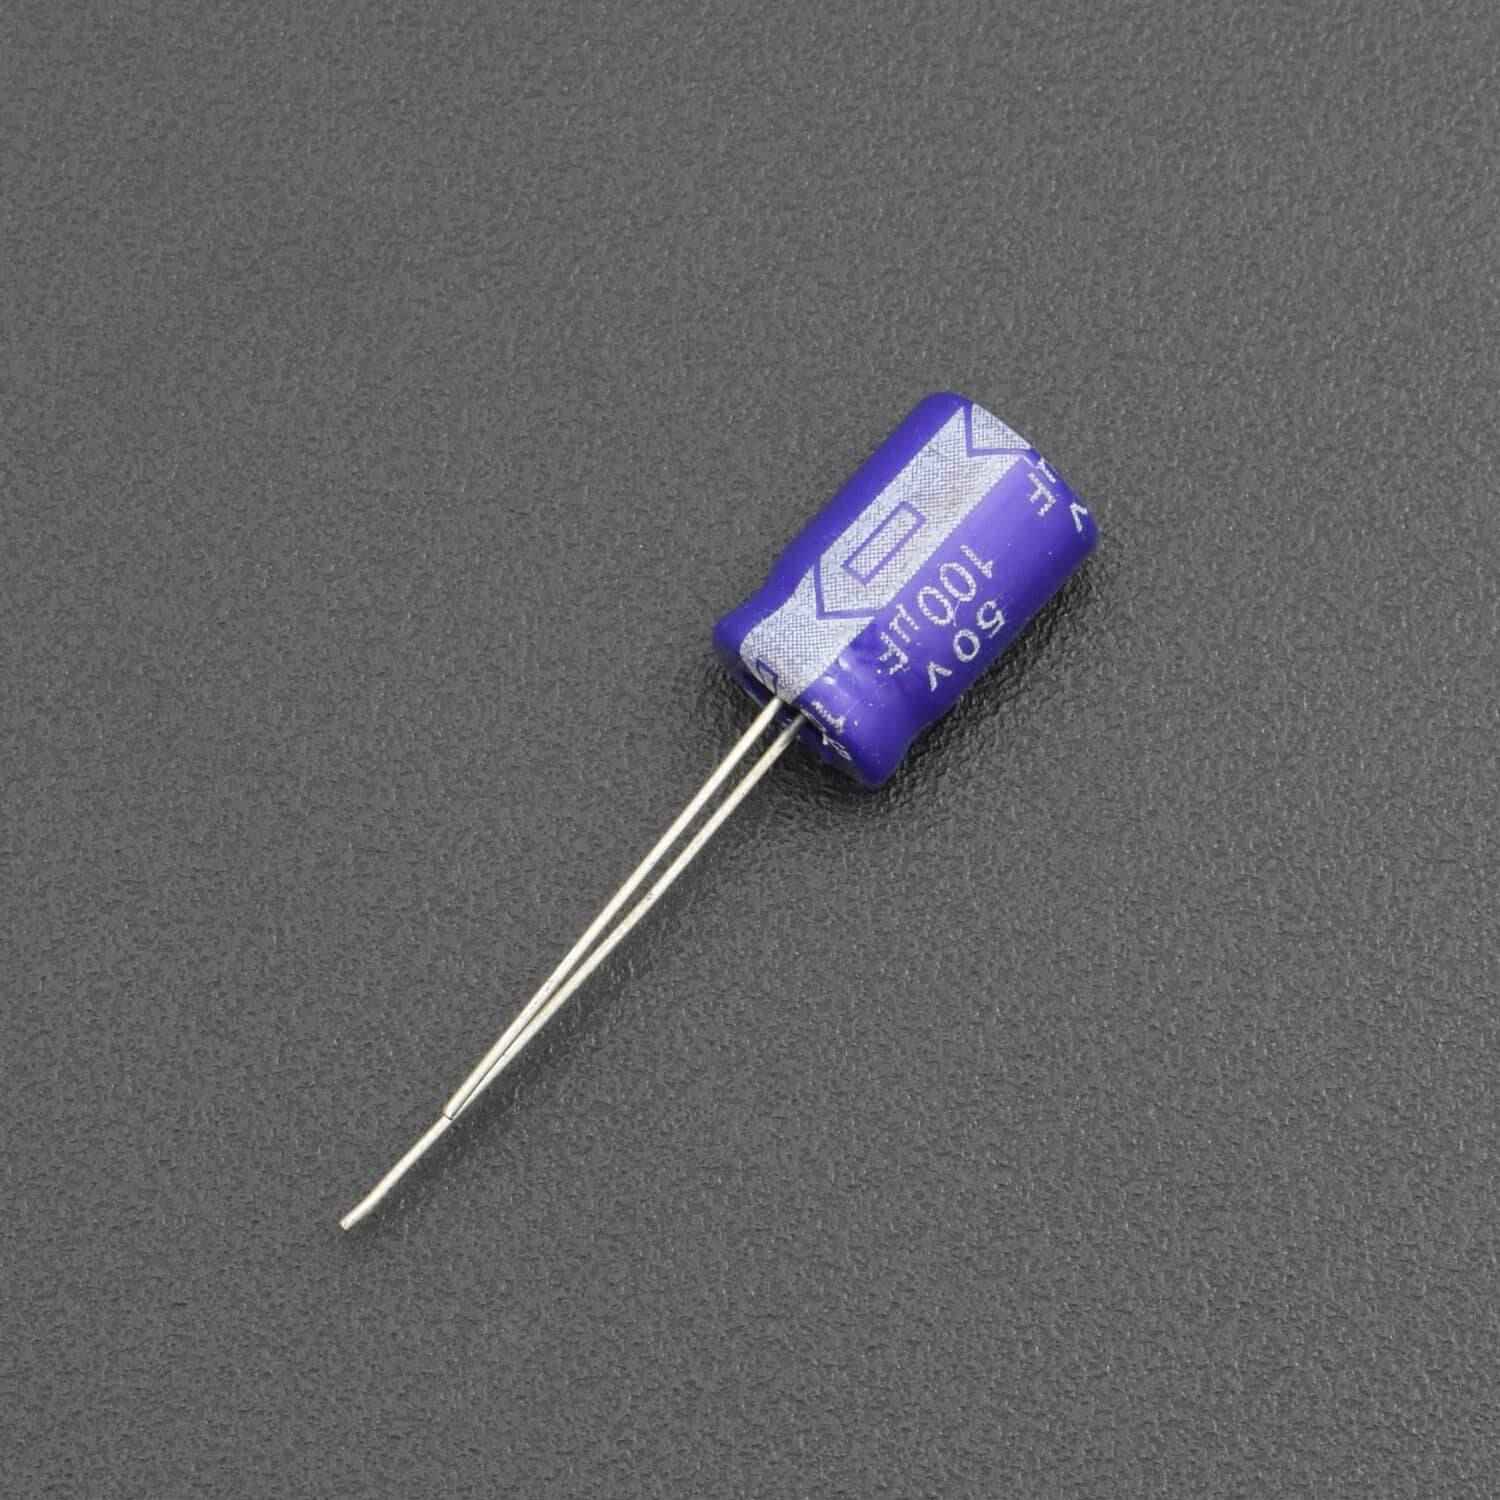 100uF 50V Electrolytic Capacitor-RS741 - REES52